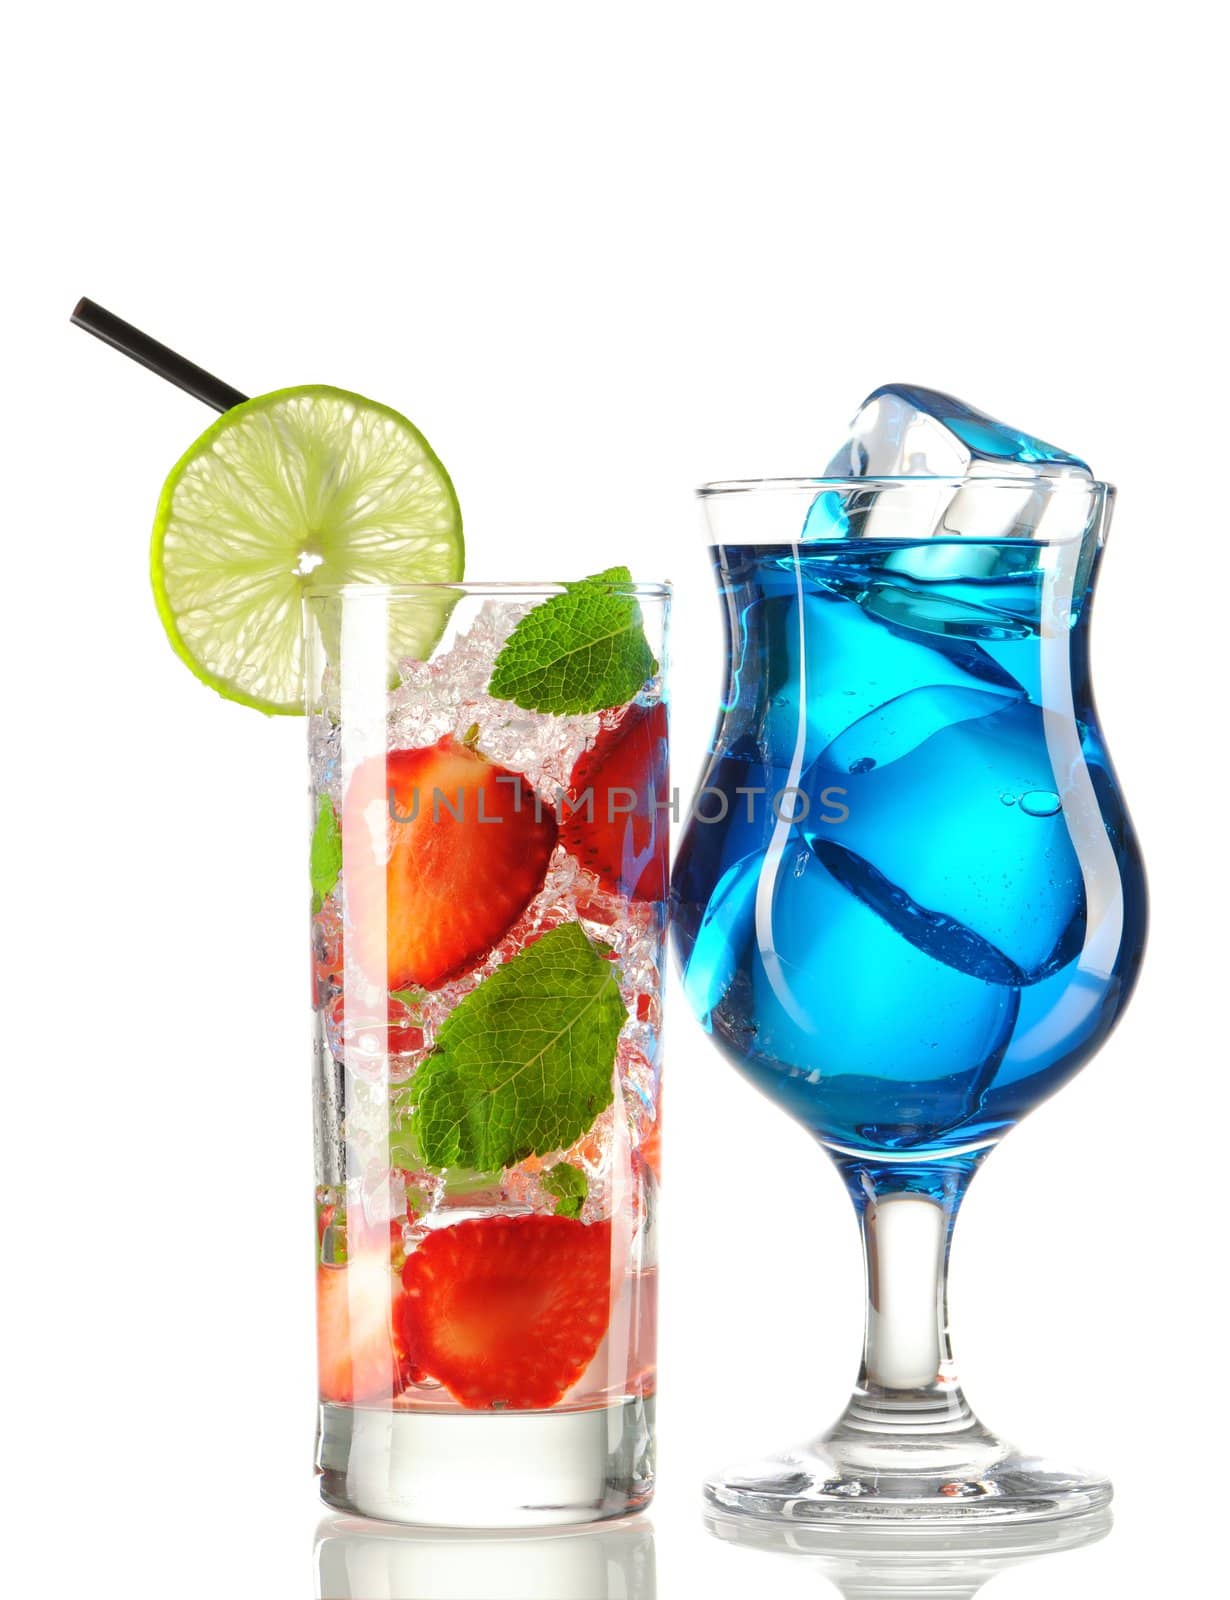 Strawberry mojito and Blue Curacao cocktails isolated on white